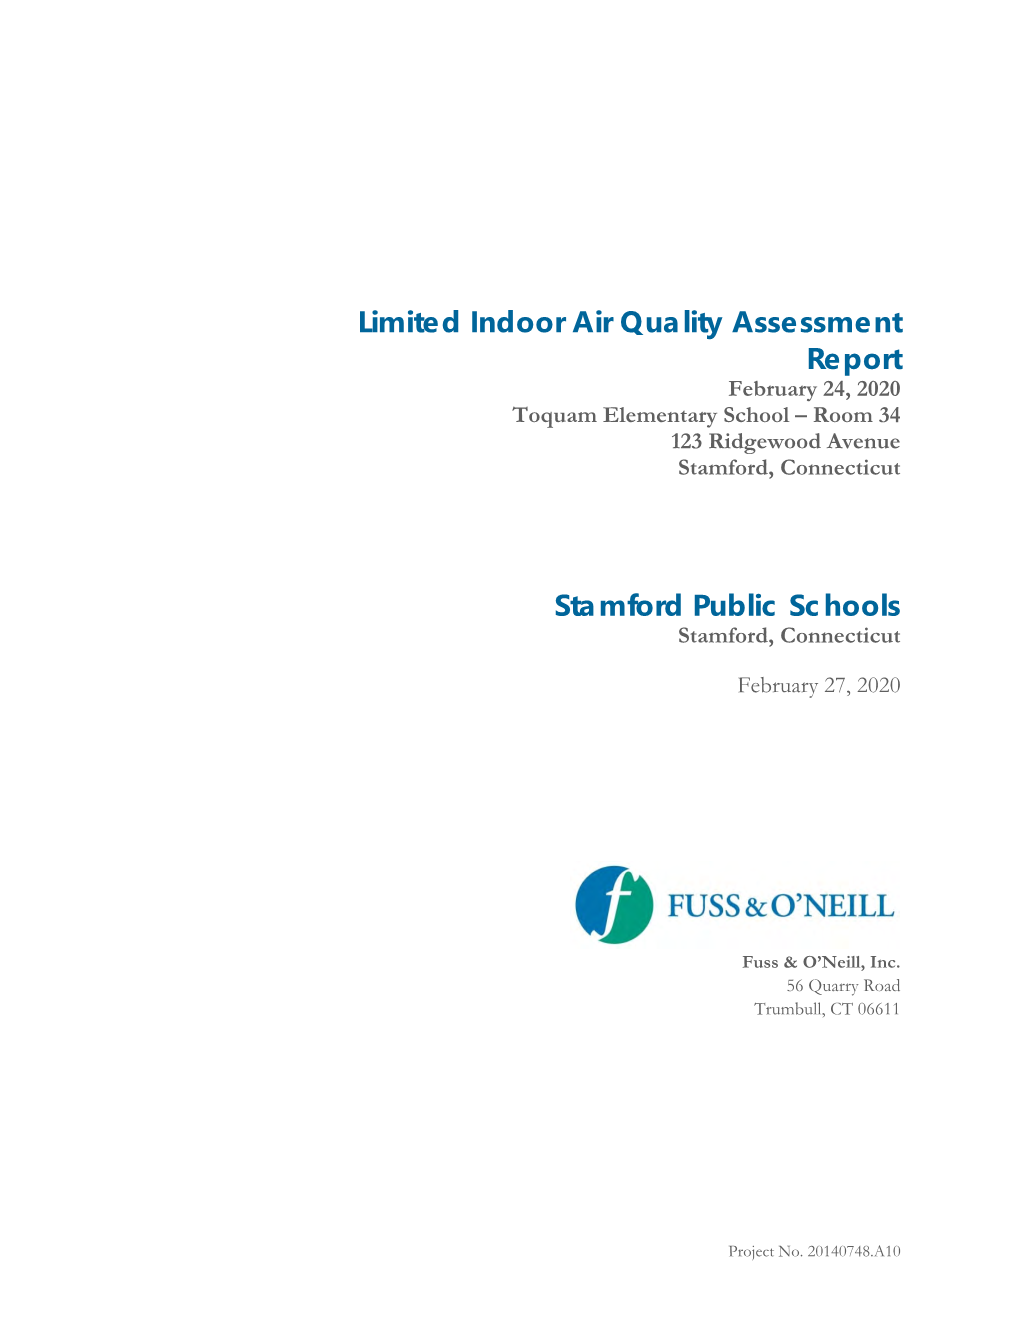 Limited Indoor Air Quality Assessment Report Stamford Public Schools